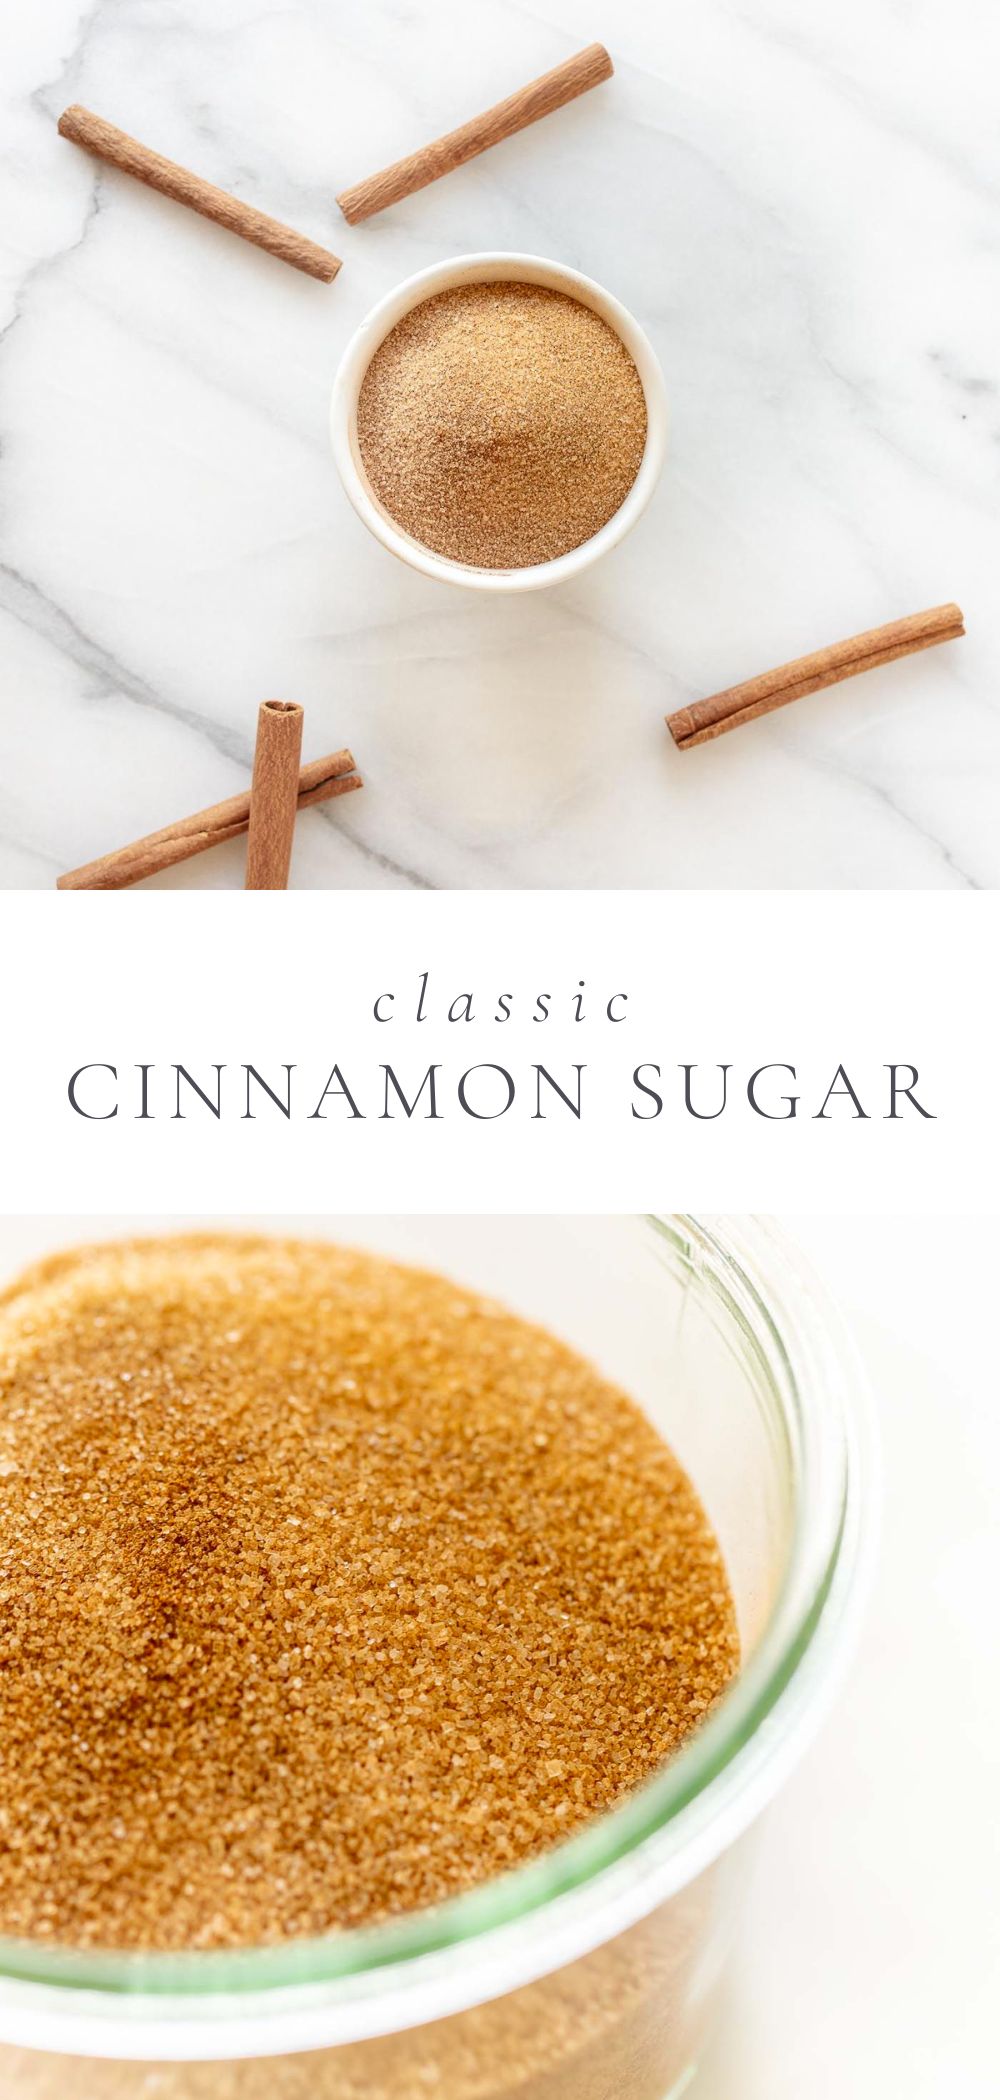 Classic Cinnamon sugar is pictured in a round glass dish on a marble counter.